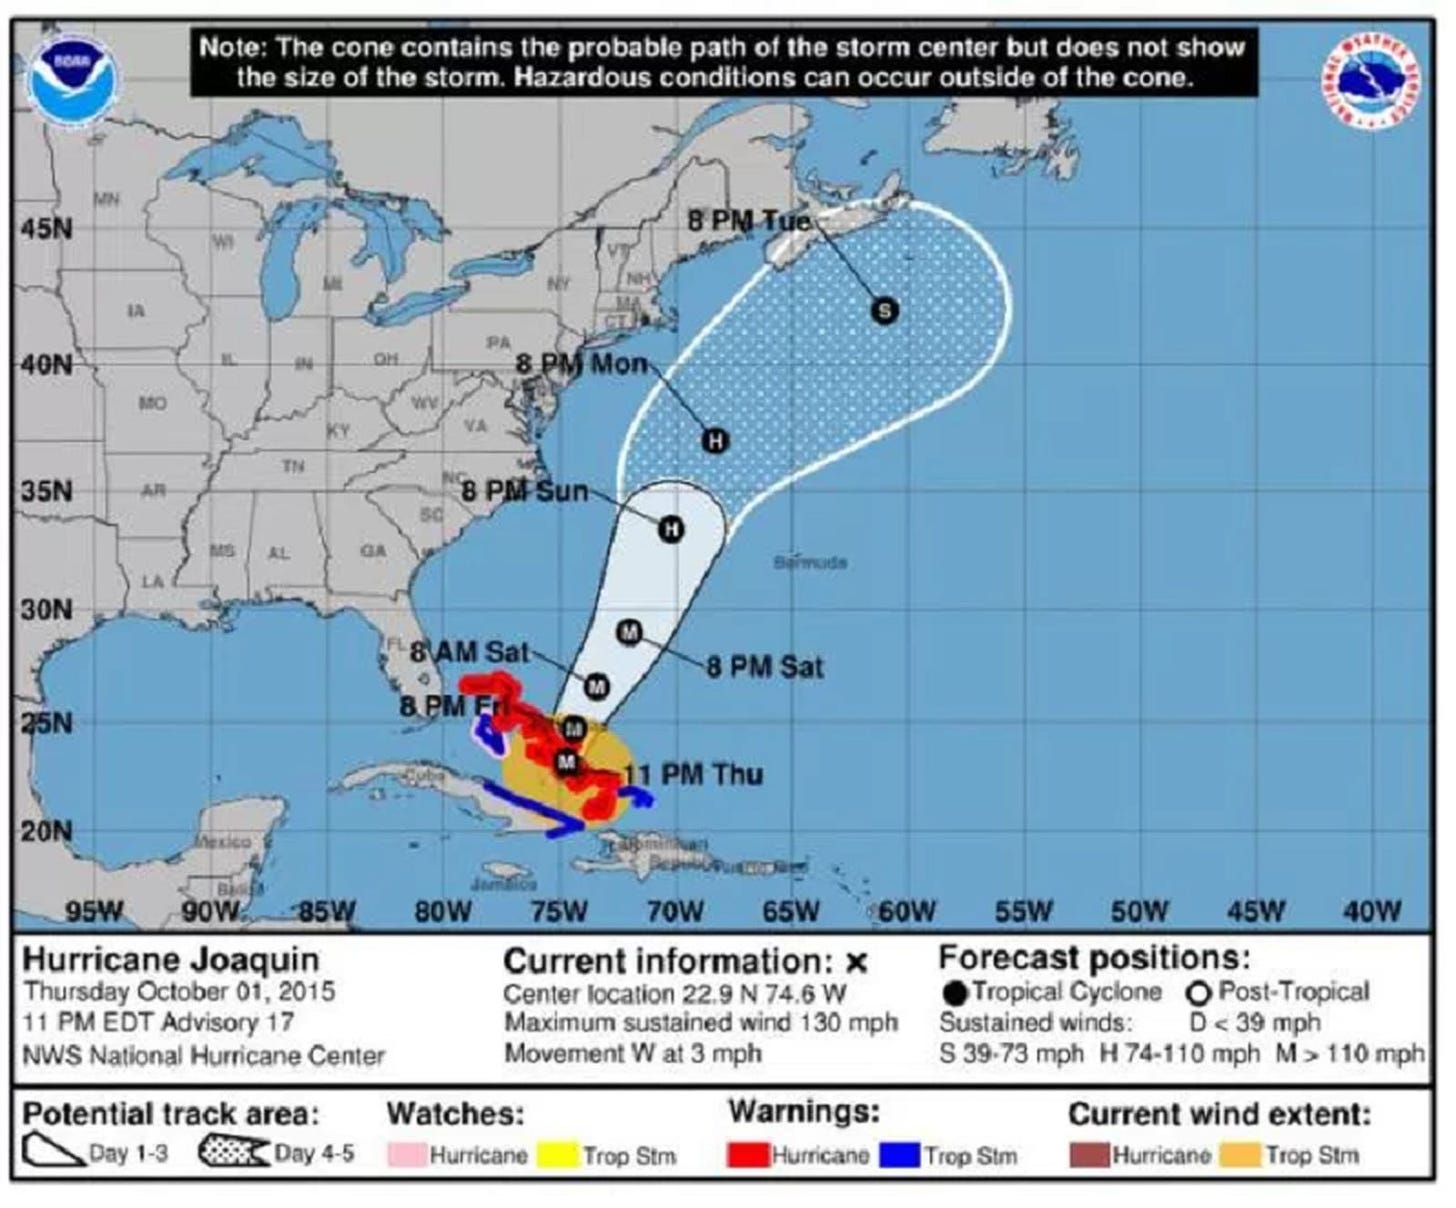 A storm path projection figure from the NWS and NOAA, showing a hurricane in the Caribbean moving northeast along the US seaboard.